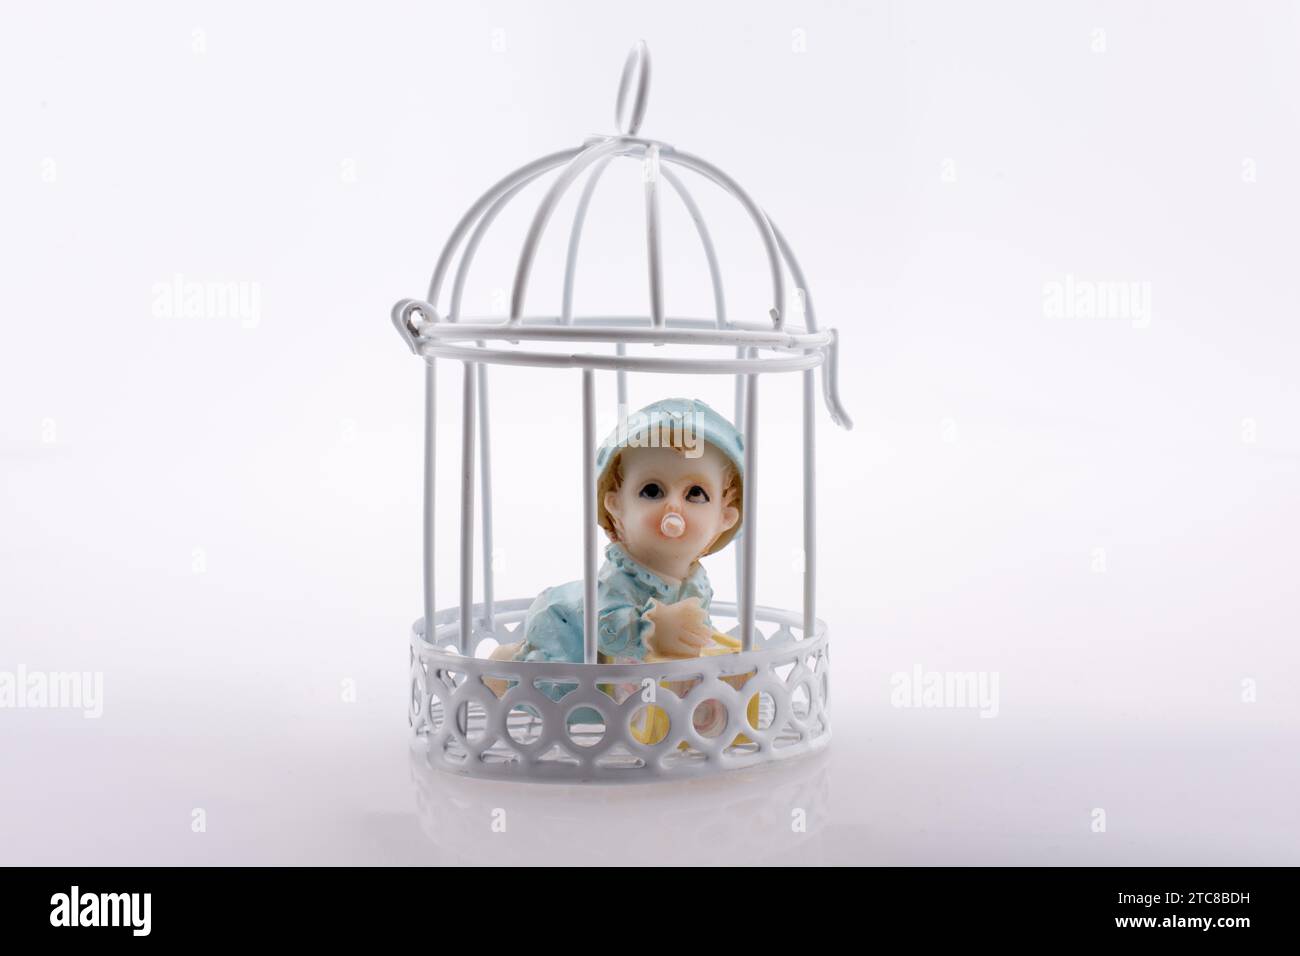 Little baby doll in cage on a white background Stock Photo